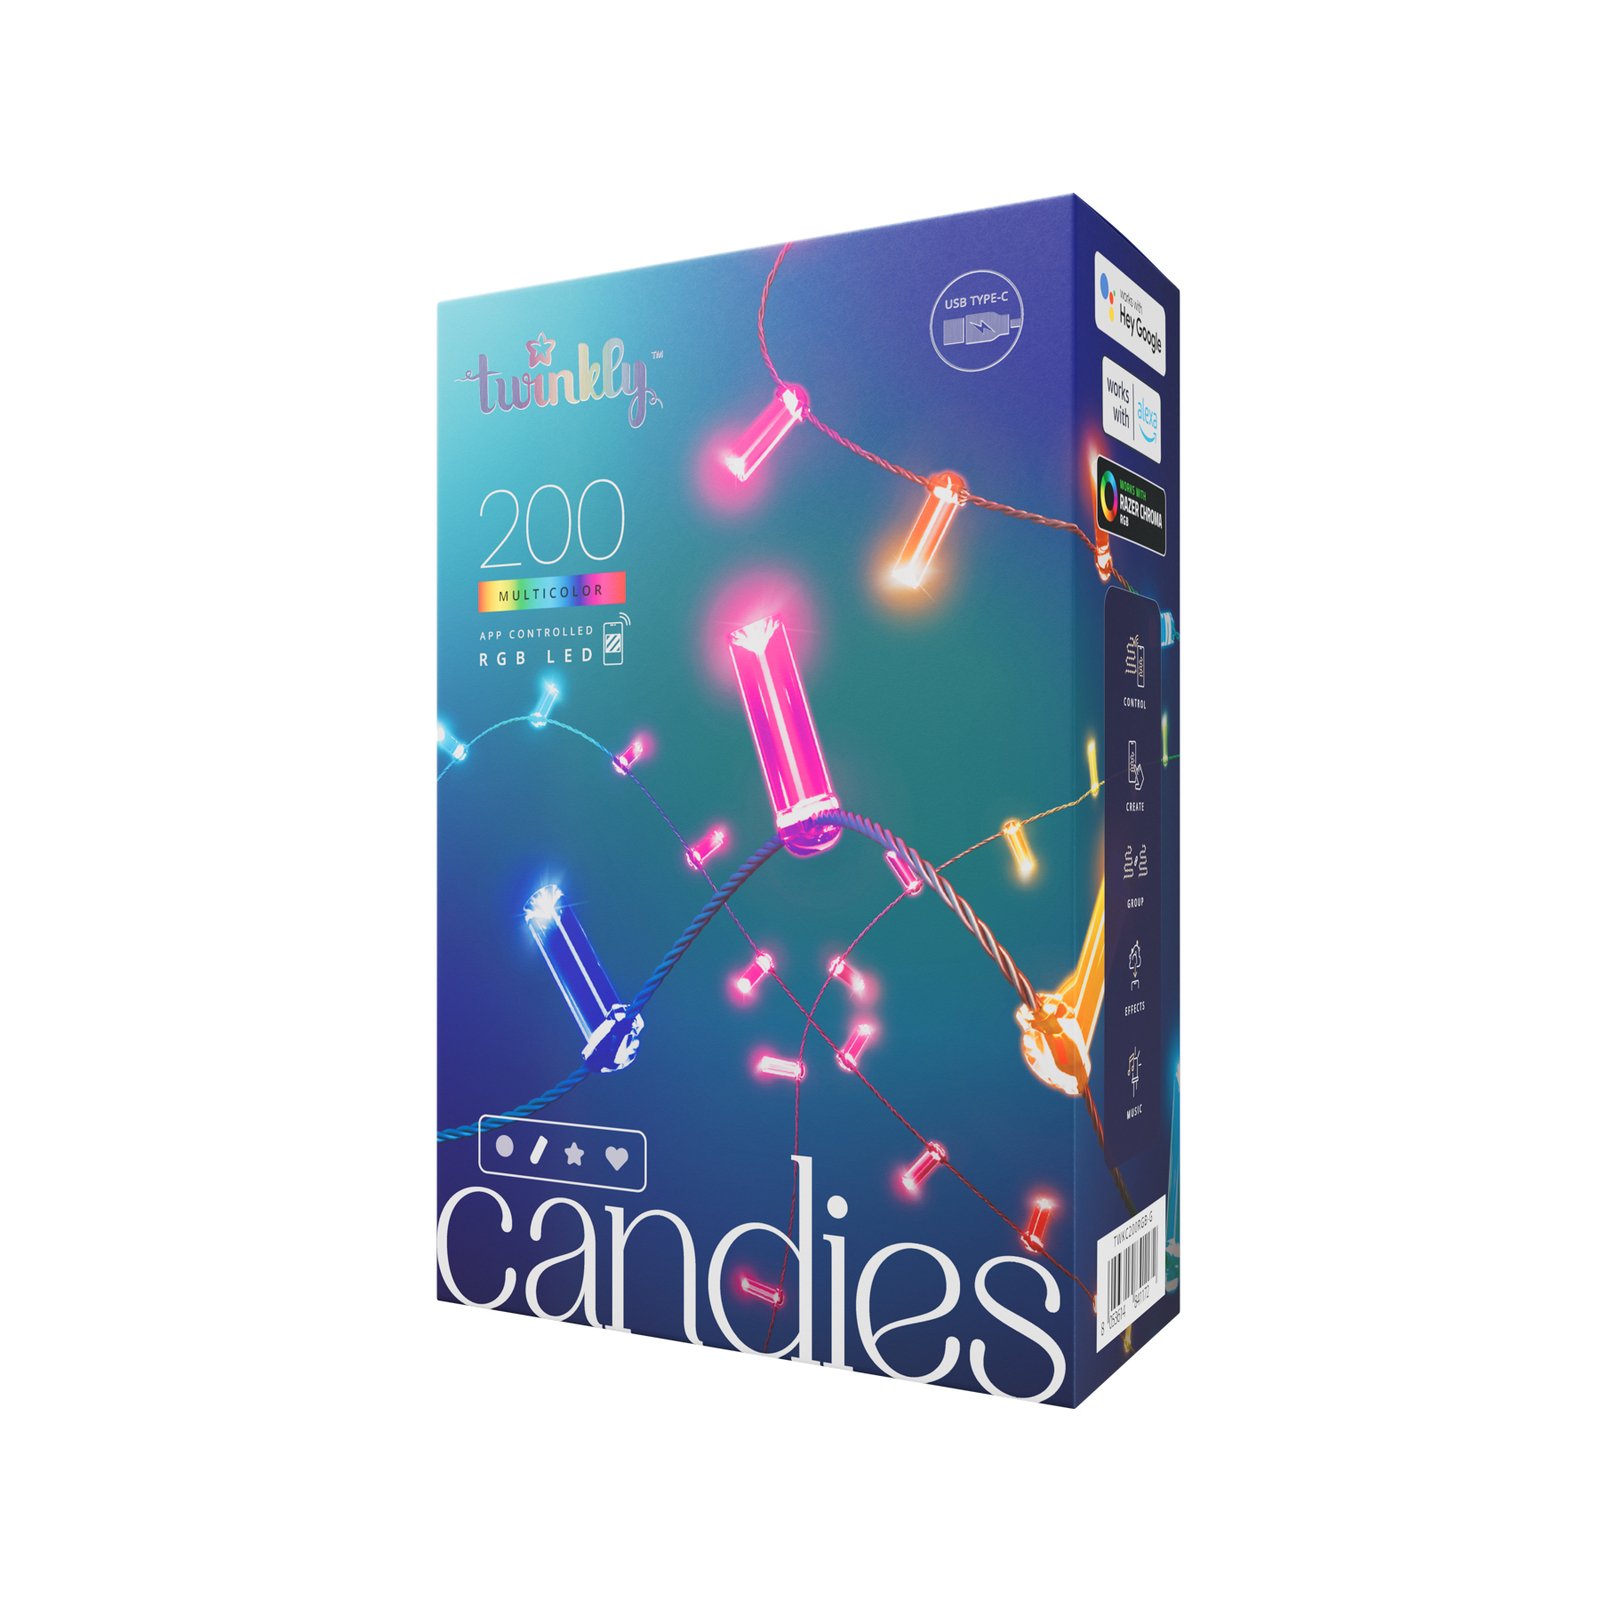 Twinkly Candies 200 candele smart cavo verde 12m